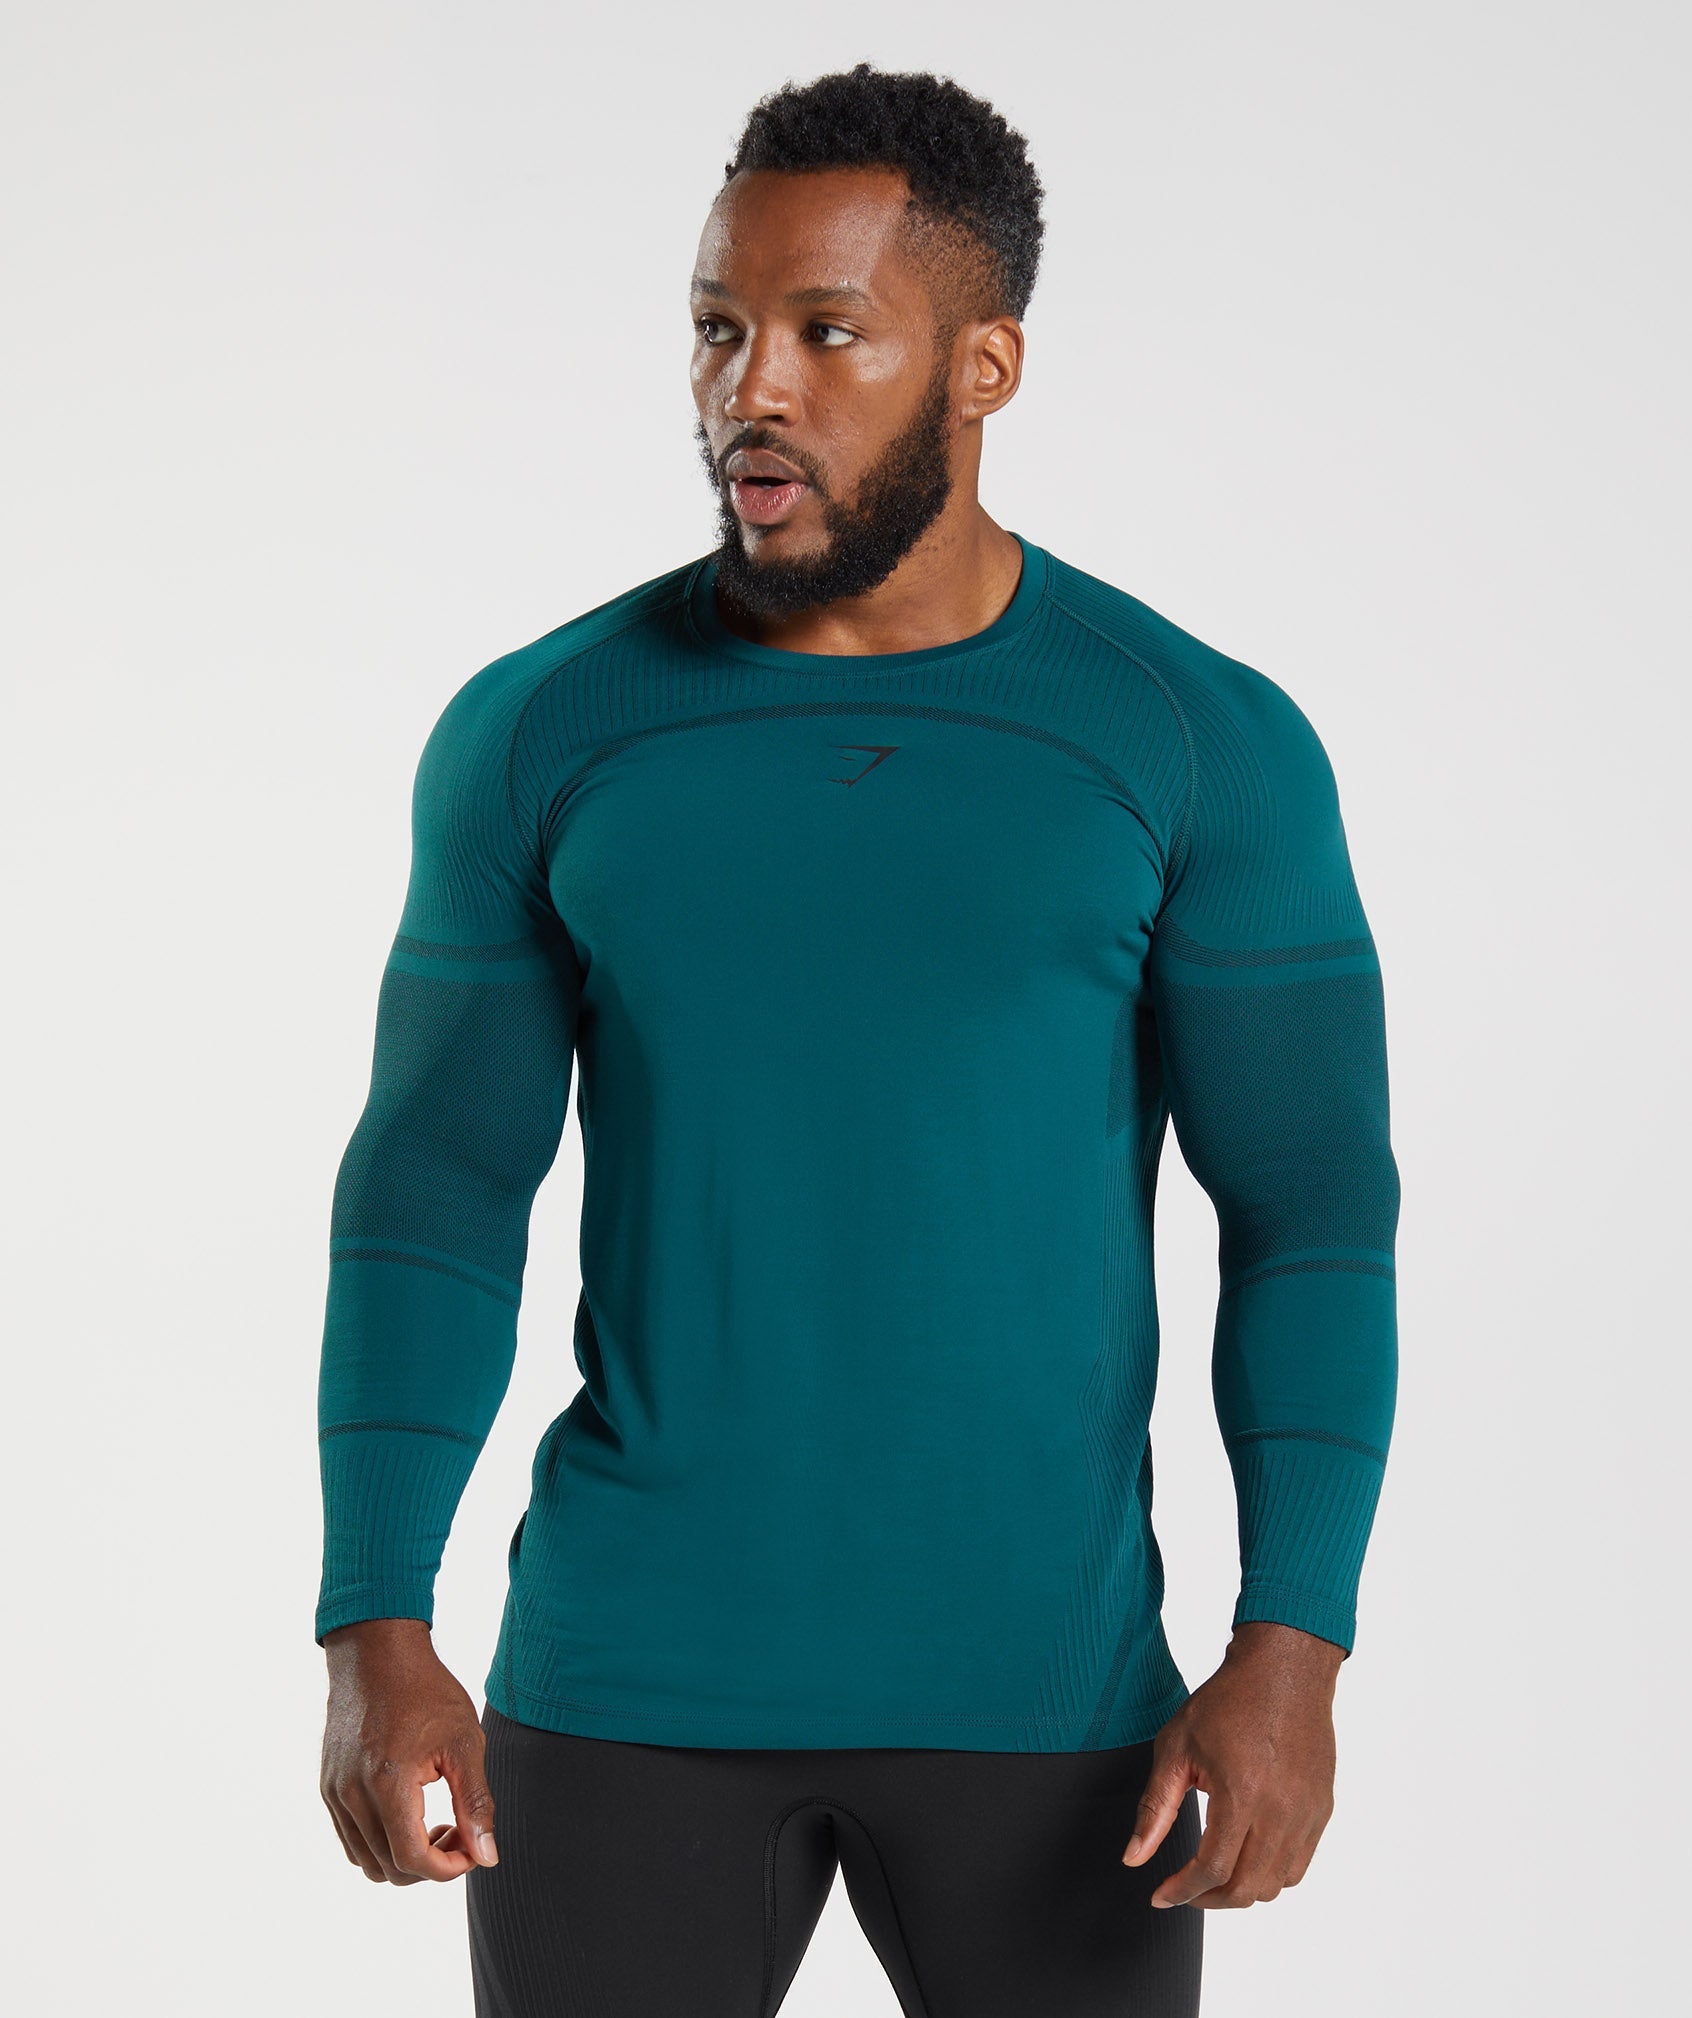 315 LS Seamless T-Shirt in Winter Teal/Black - view 1